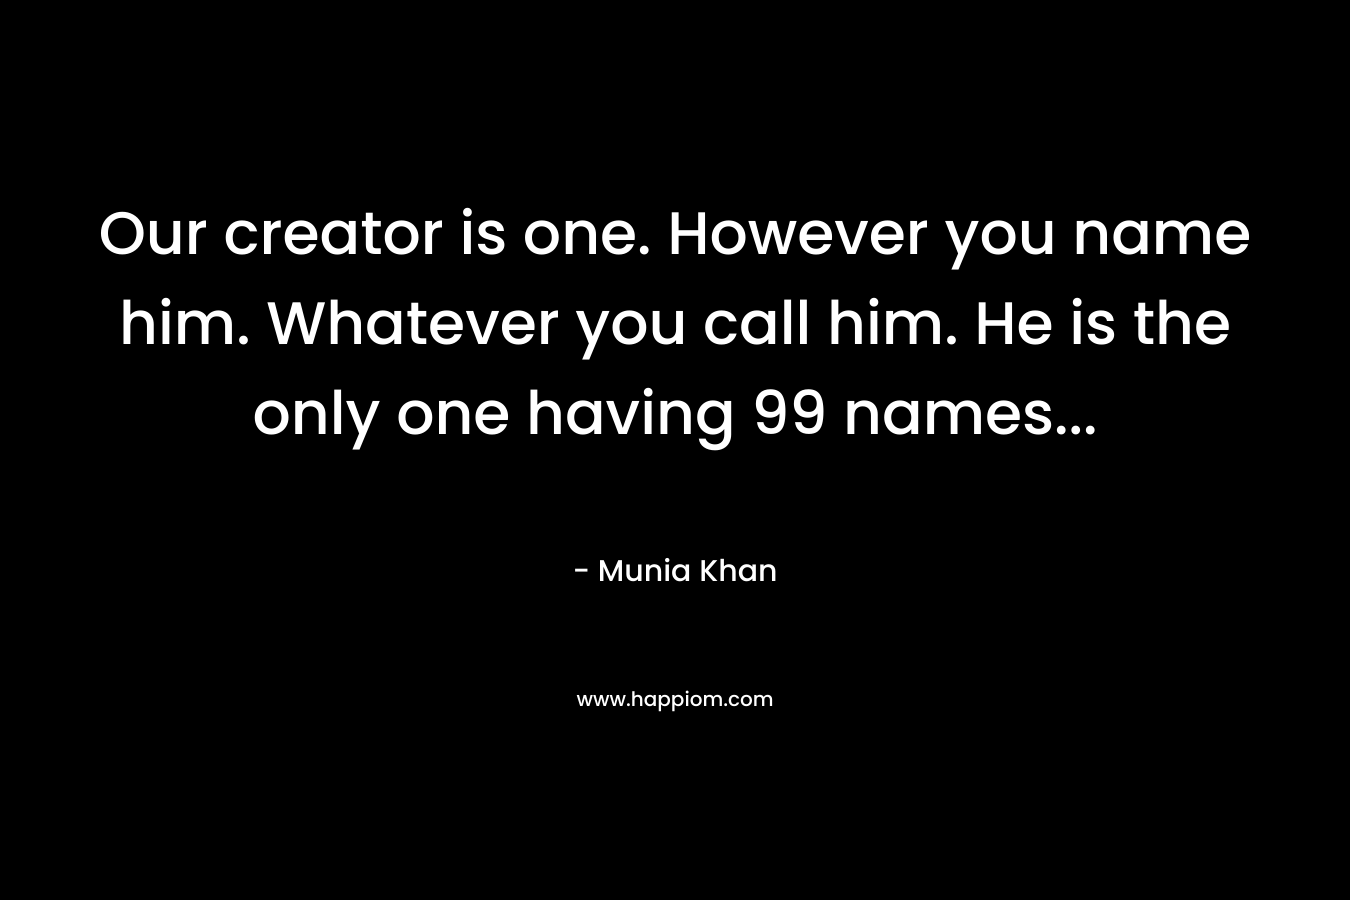 Our creator is one. However you name him. Whatever you call him. He is the only one having 99 names...